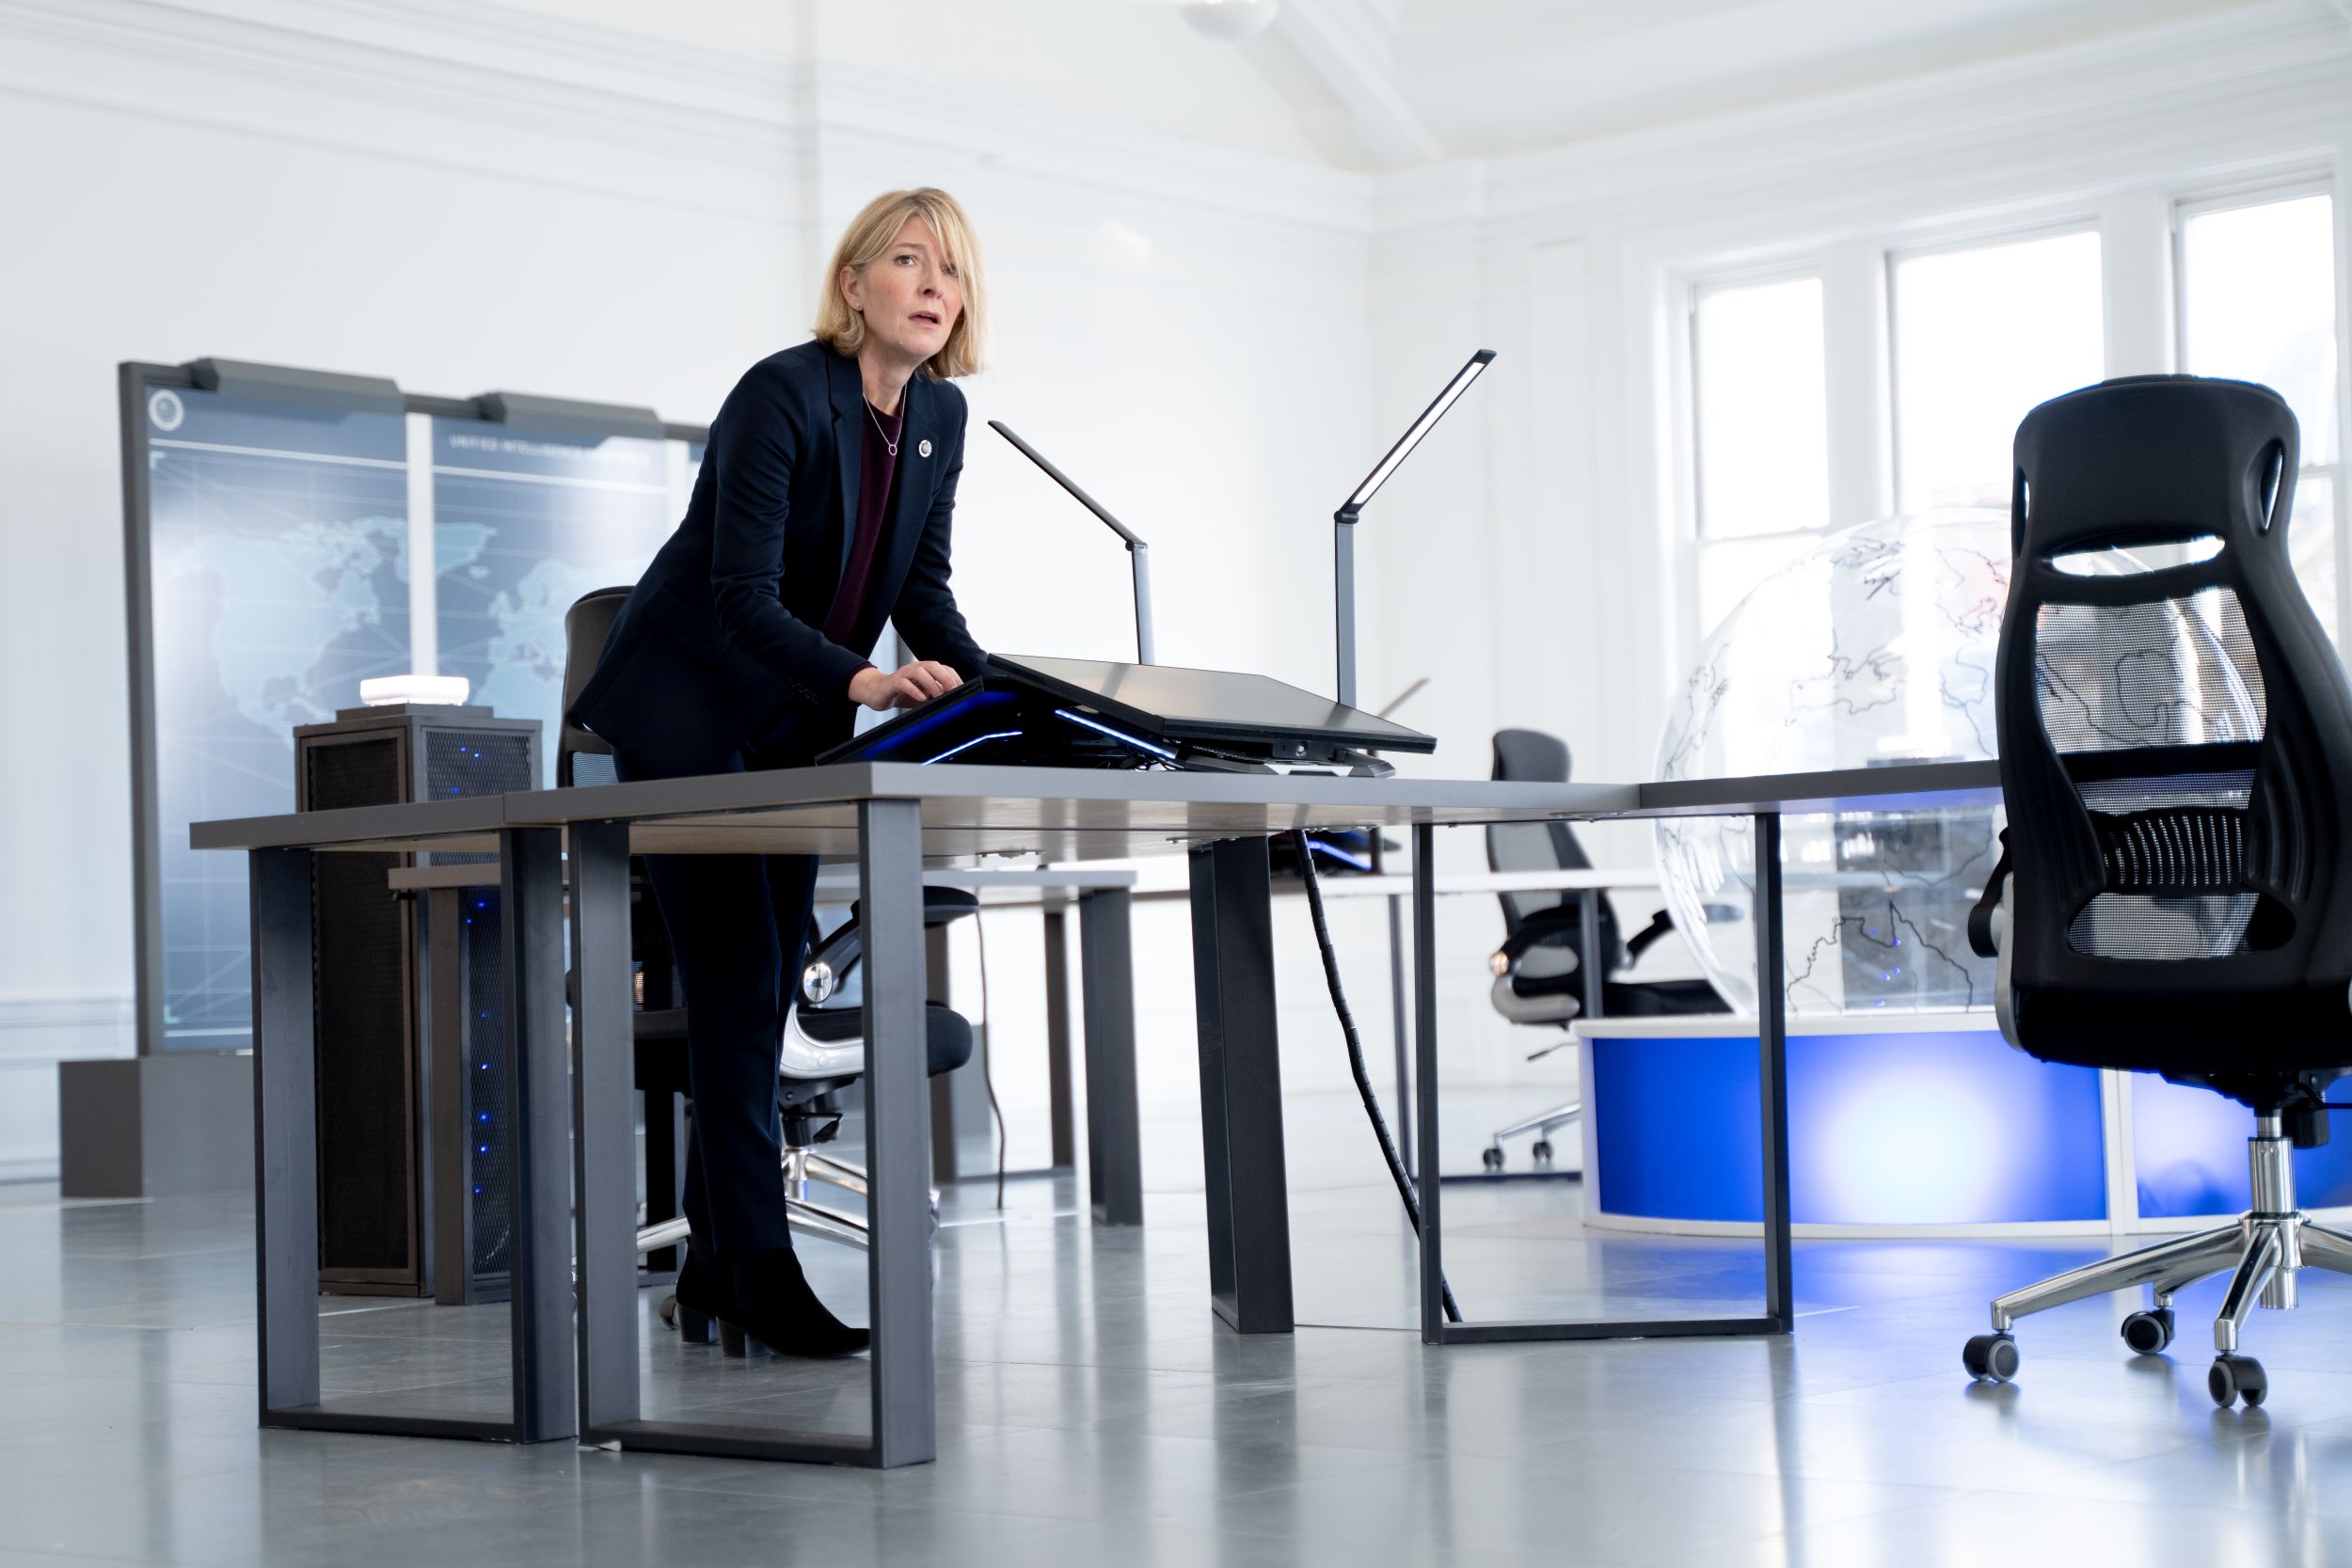 Jemma Redgrave as Kate Stewart in 'Doctor Who: The Power of the Doctor'